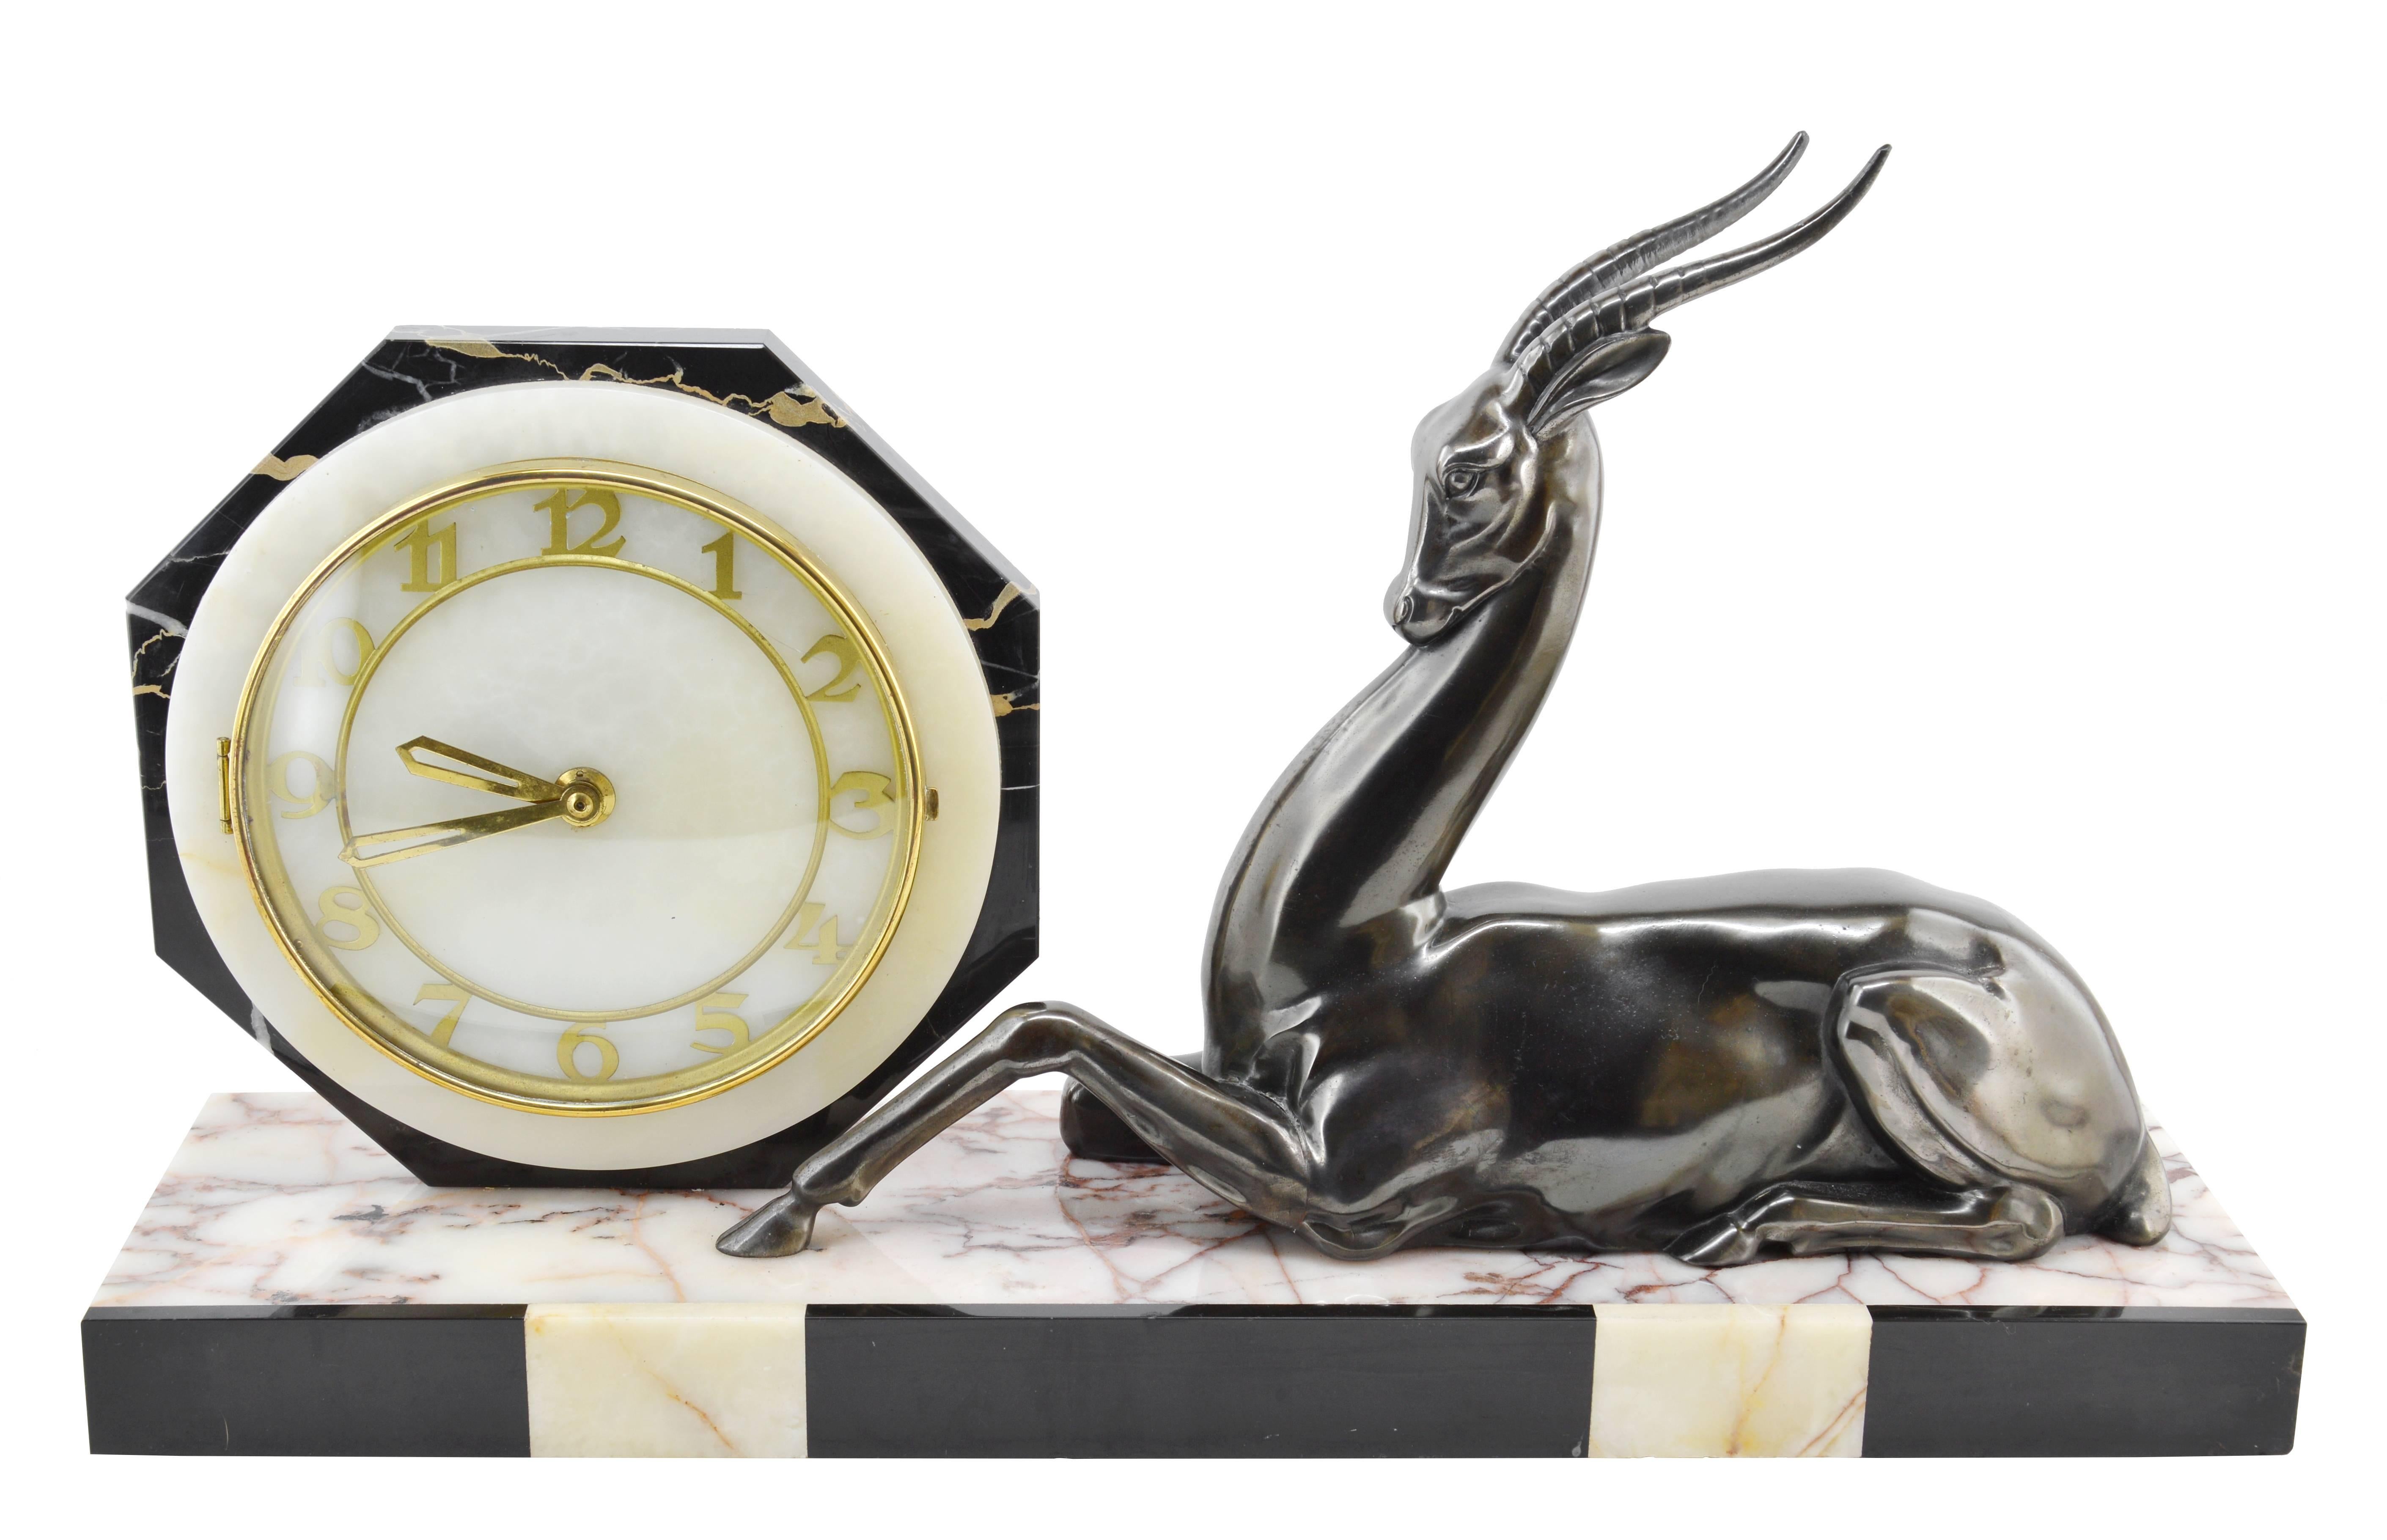 French Art Deco clock, France, circa 1925. Spelter, marble, onyx, brass and glass. Spelter antelope. 8 days movement.